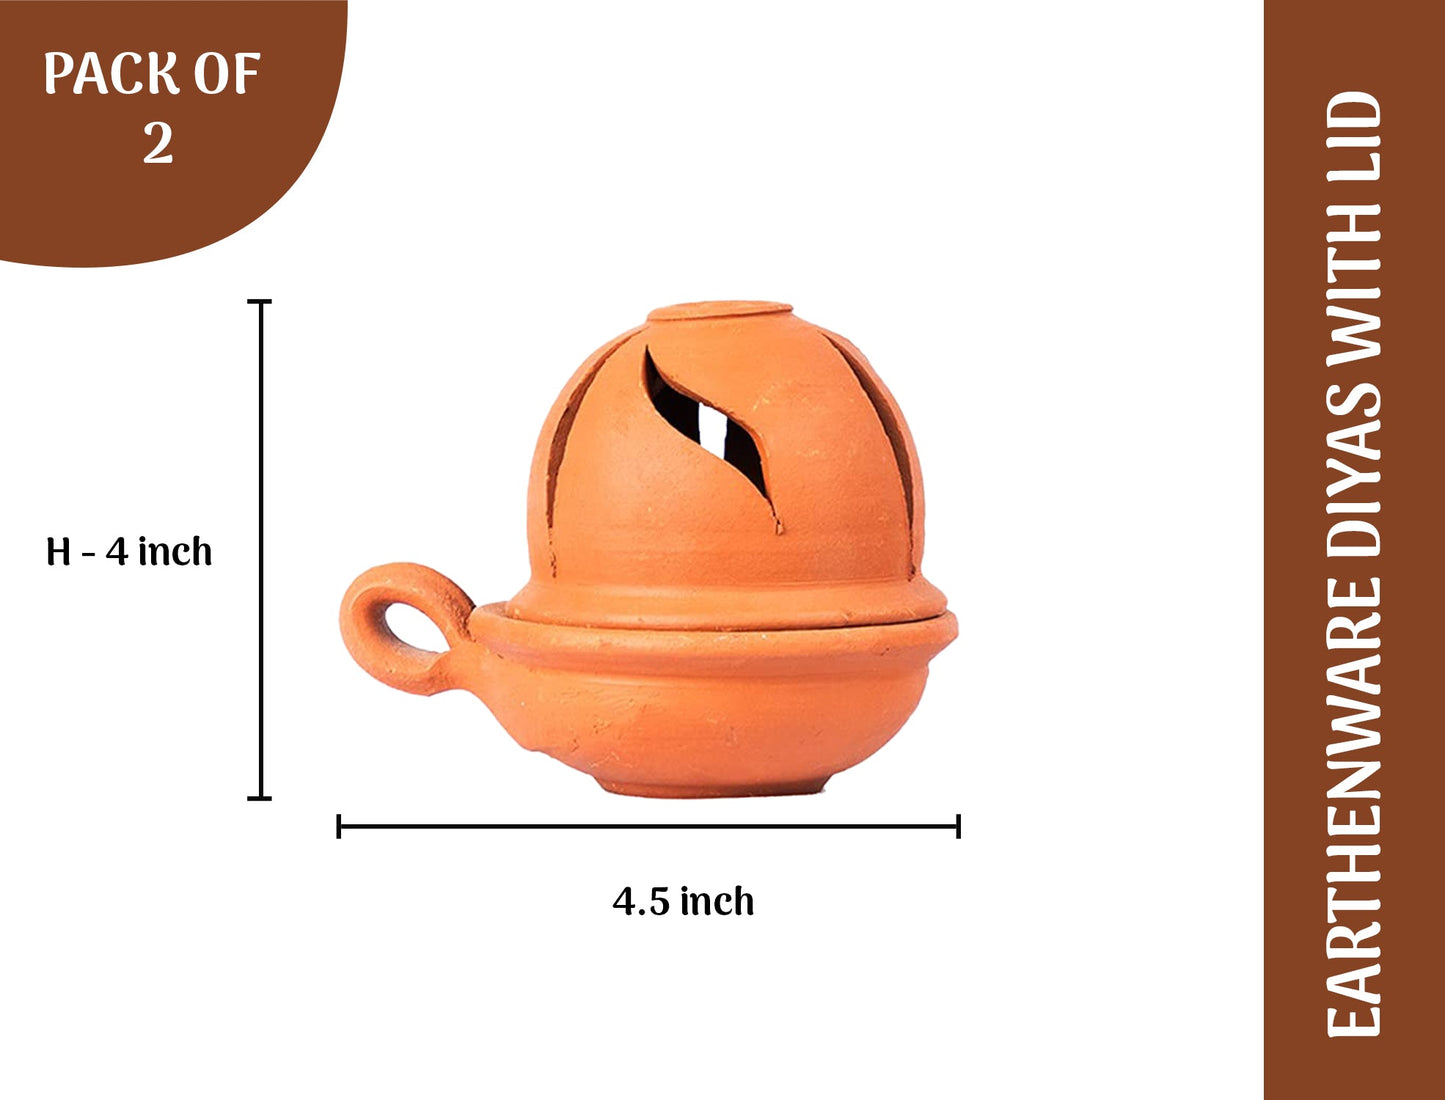 Earthen Clay  Diyas with Lid (2 Quantity)